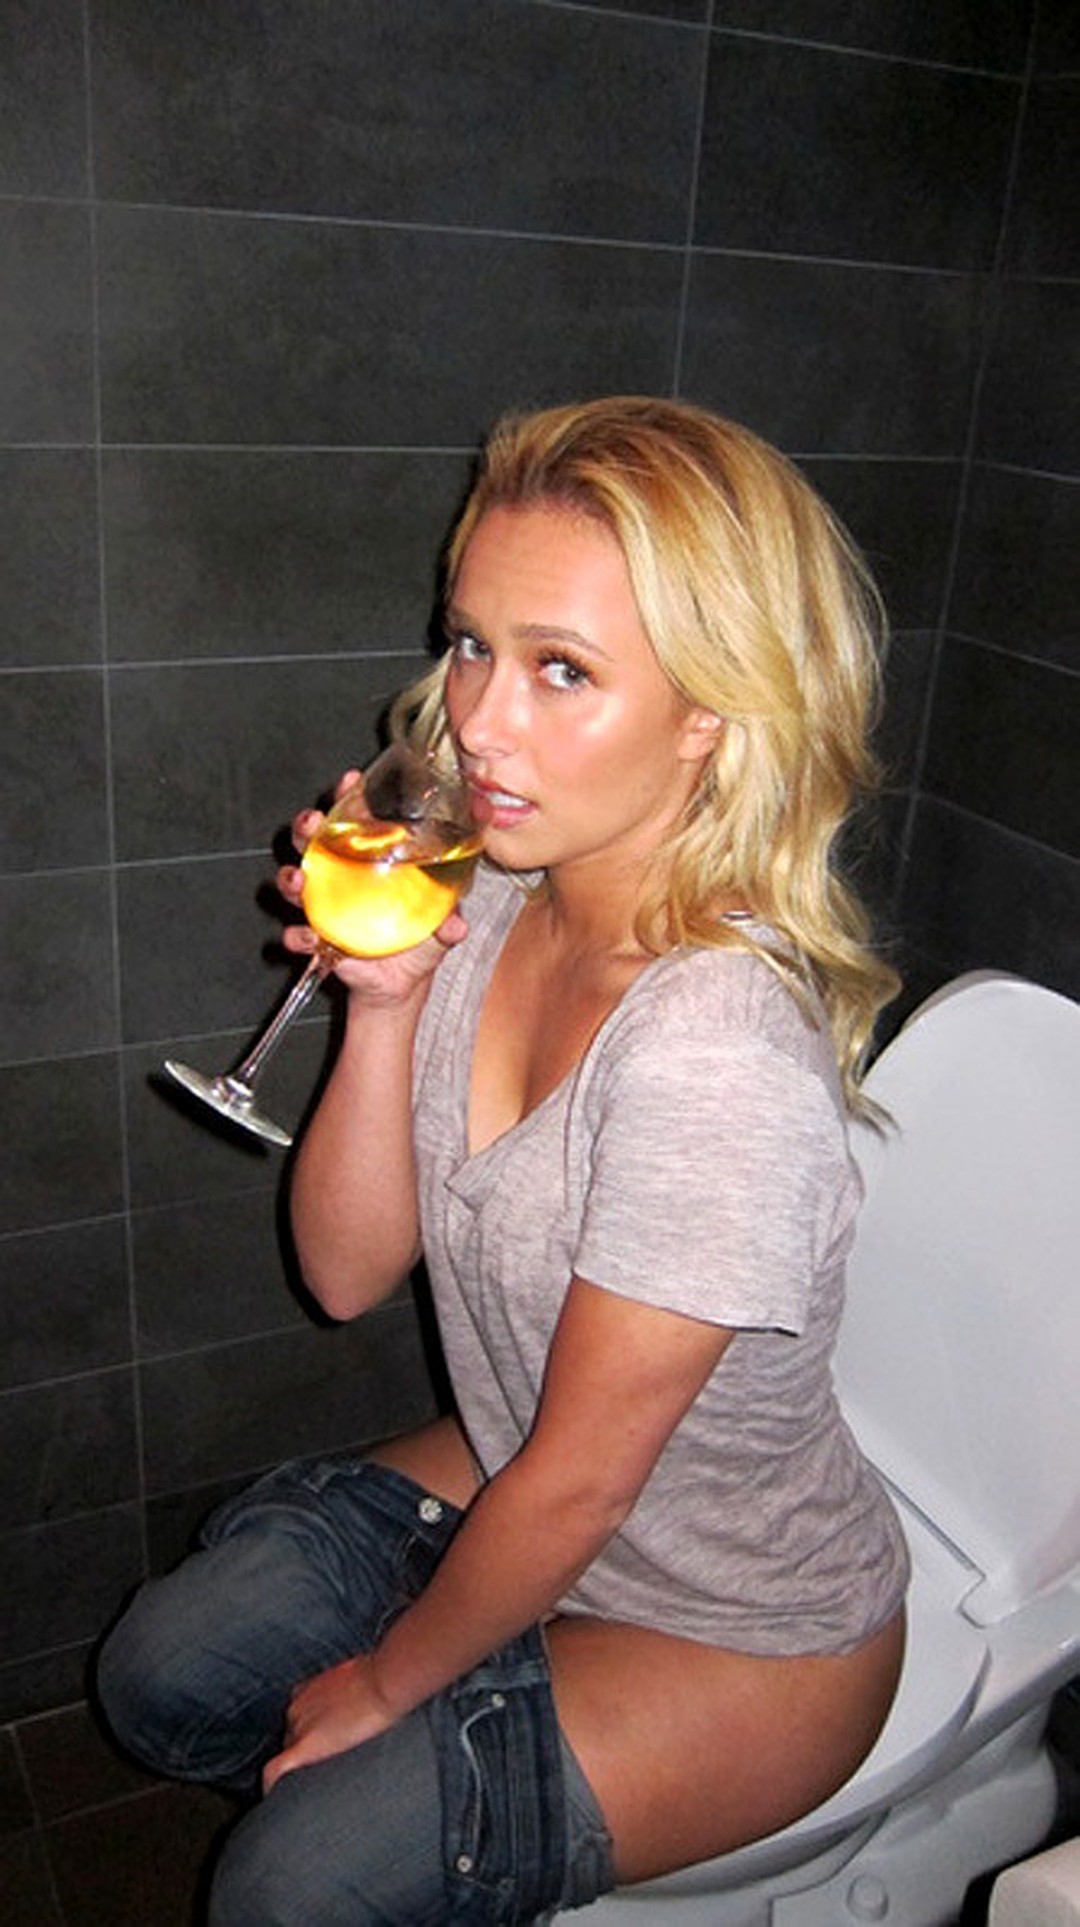 Hayden Panettiere Nude Sexy Photo Collection & Bio! - All So